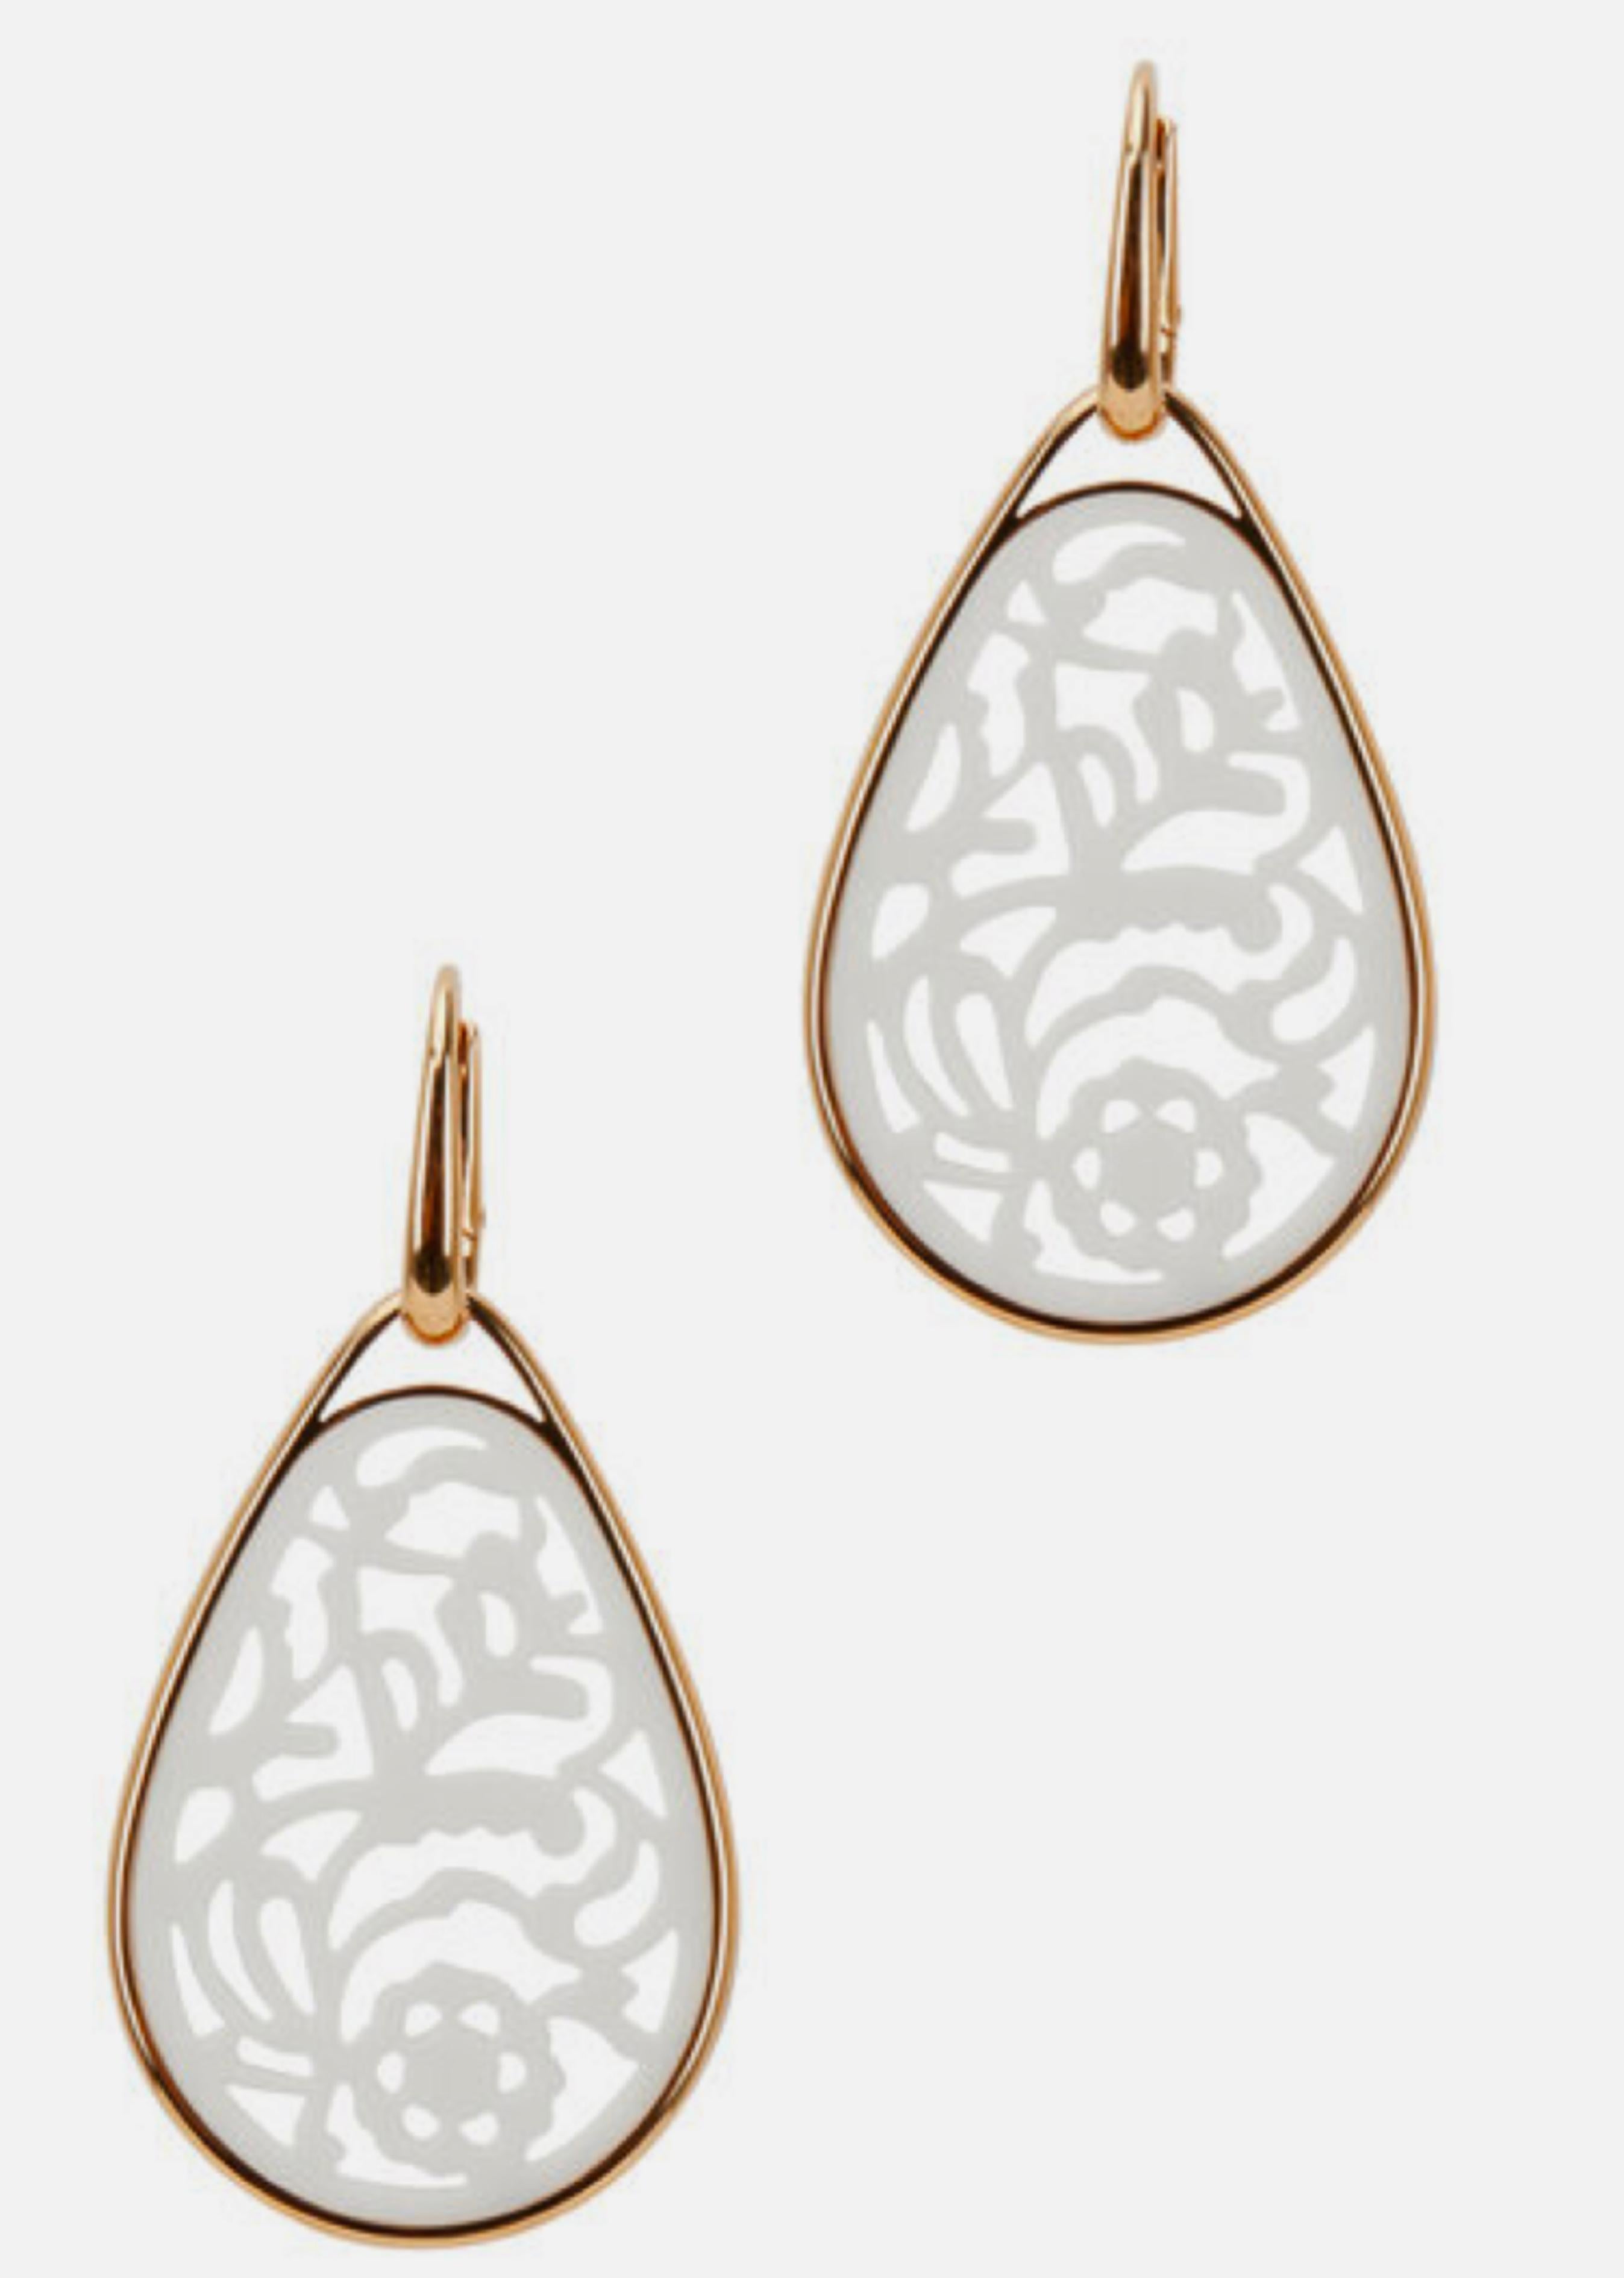 A Pomellato Iconic Timeless Jewel. Lightweight and striking, laser-cut earrings adorned with sleek trim and a feminine look, they accentuate the delicacy of Rose Gold with an Inlaid Floral romantic Pattern in natural White Agate. 
In its original,